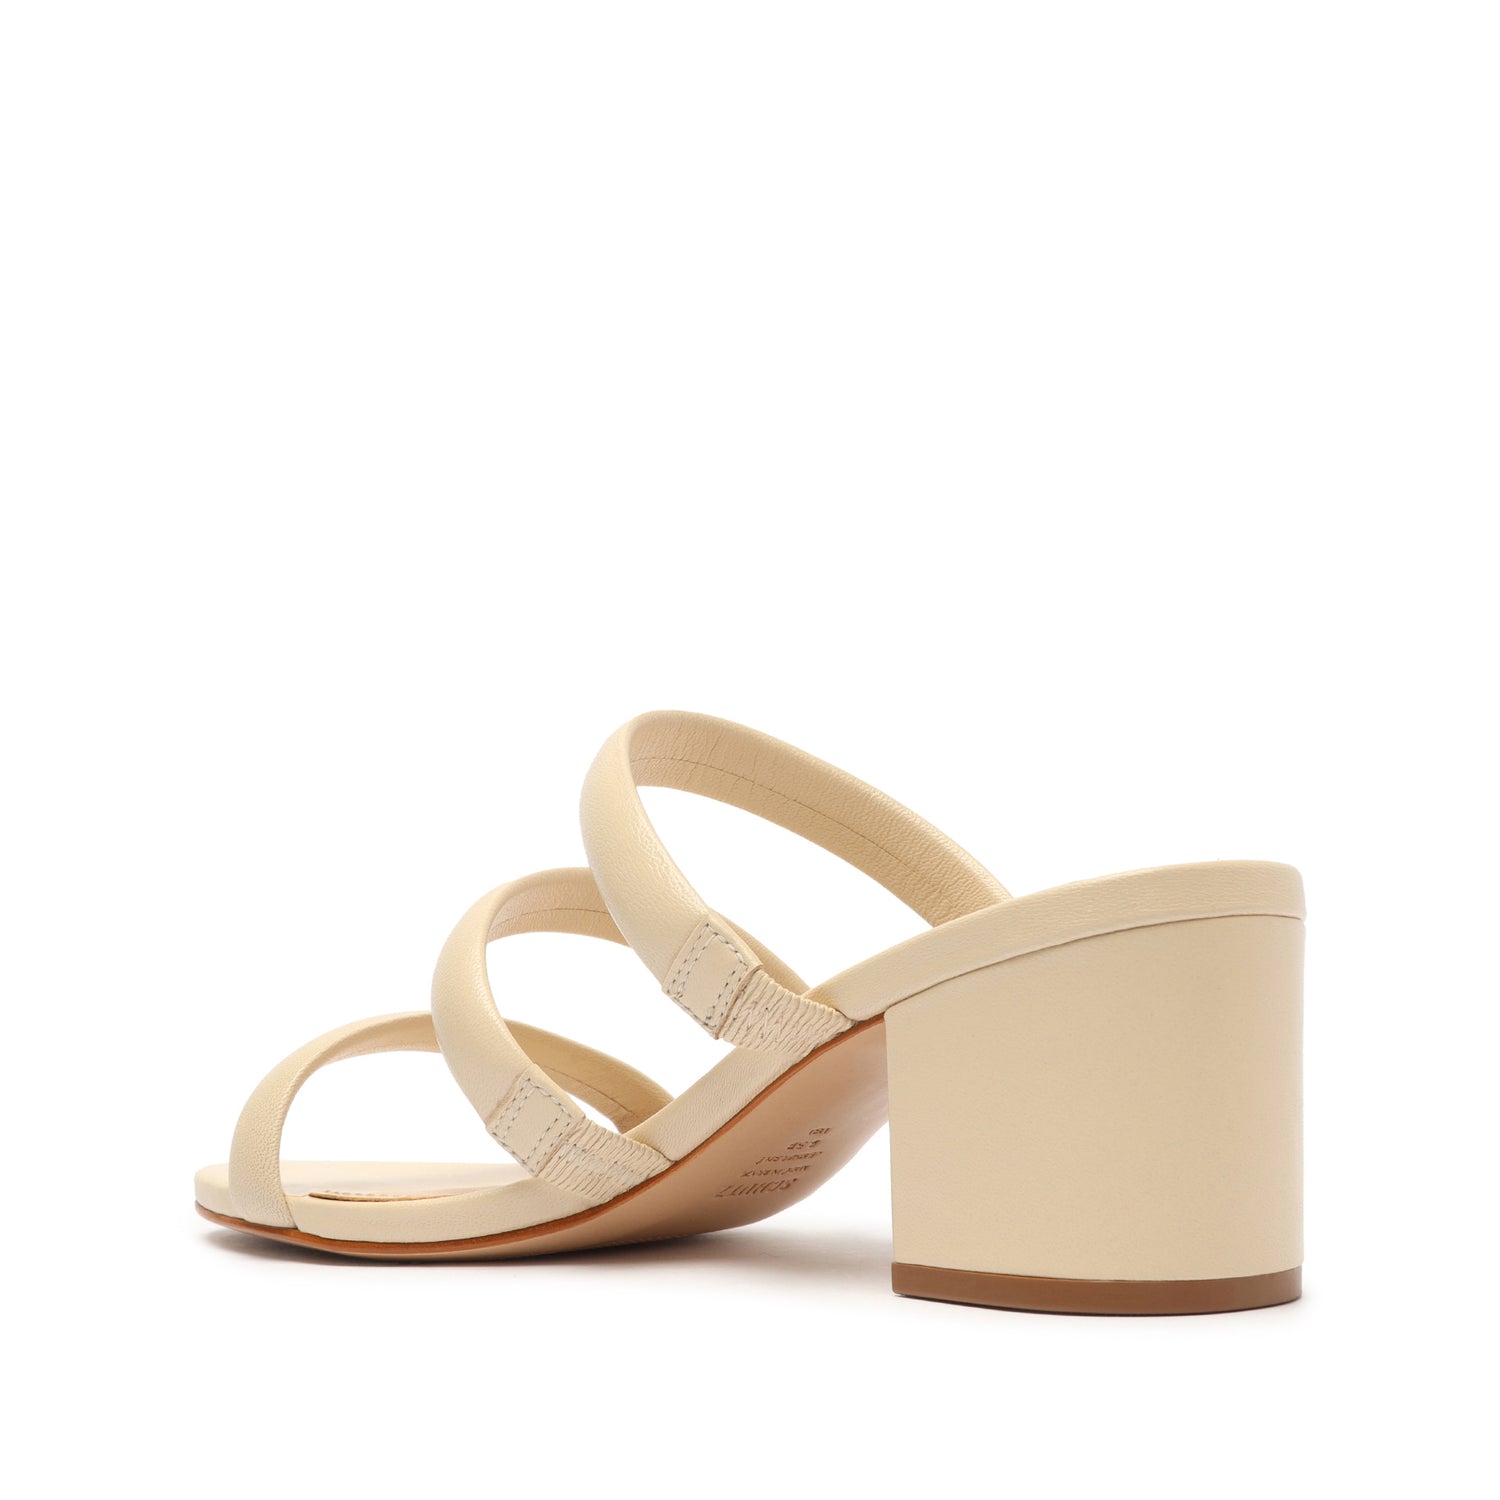 Olly Mid Block Nappa Leather Sandal Eggshell Nappa Leather